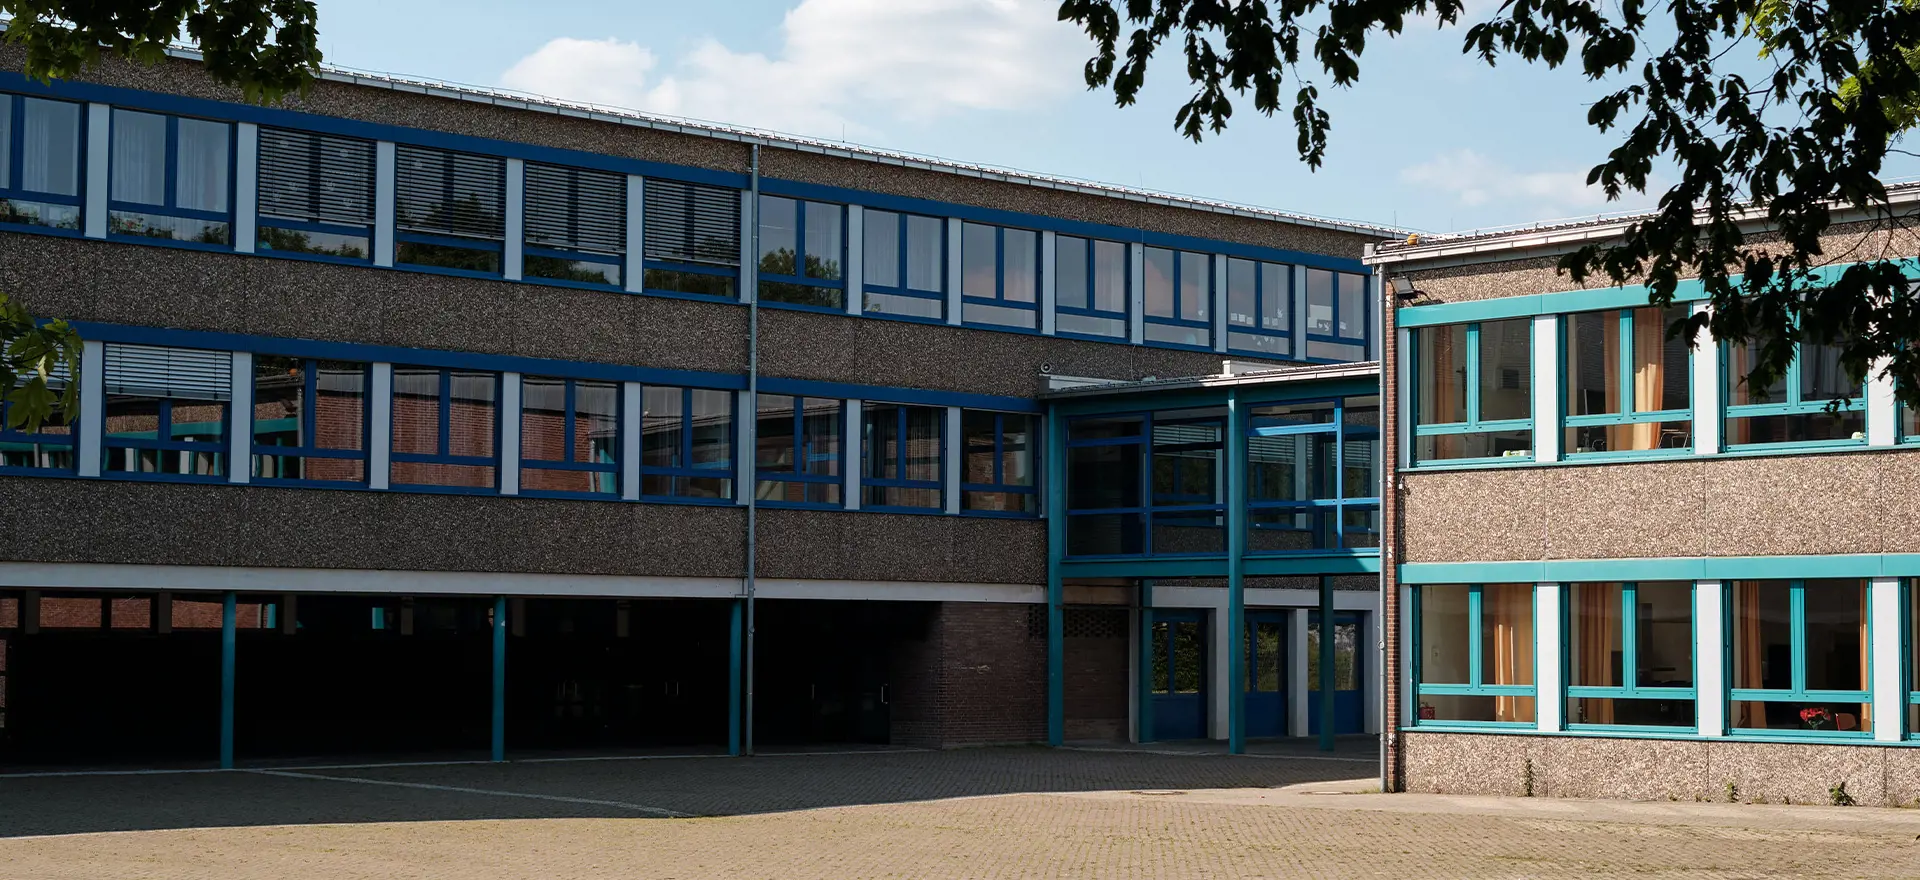 Temporary Permitted Development Rights for schools affected by Reinforced Autoclaved Aerated Concrete